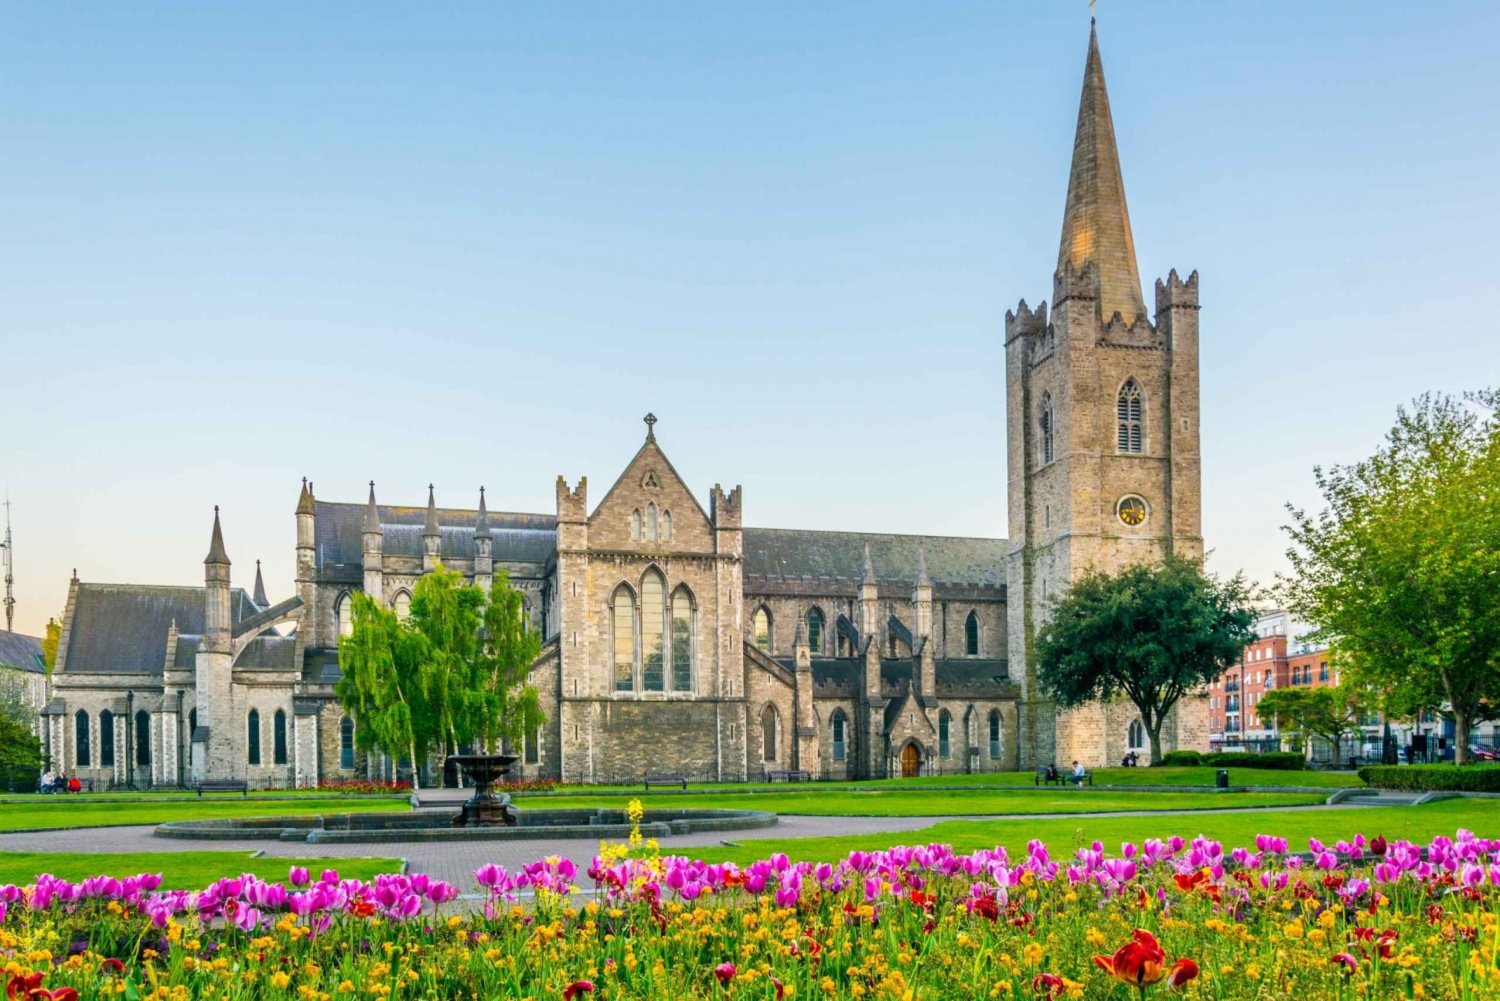 Dublin City & St Patrick's Cathedral Half-Day Tour by Car